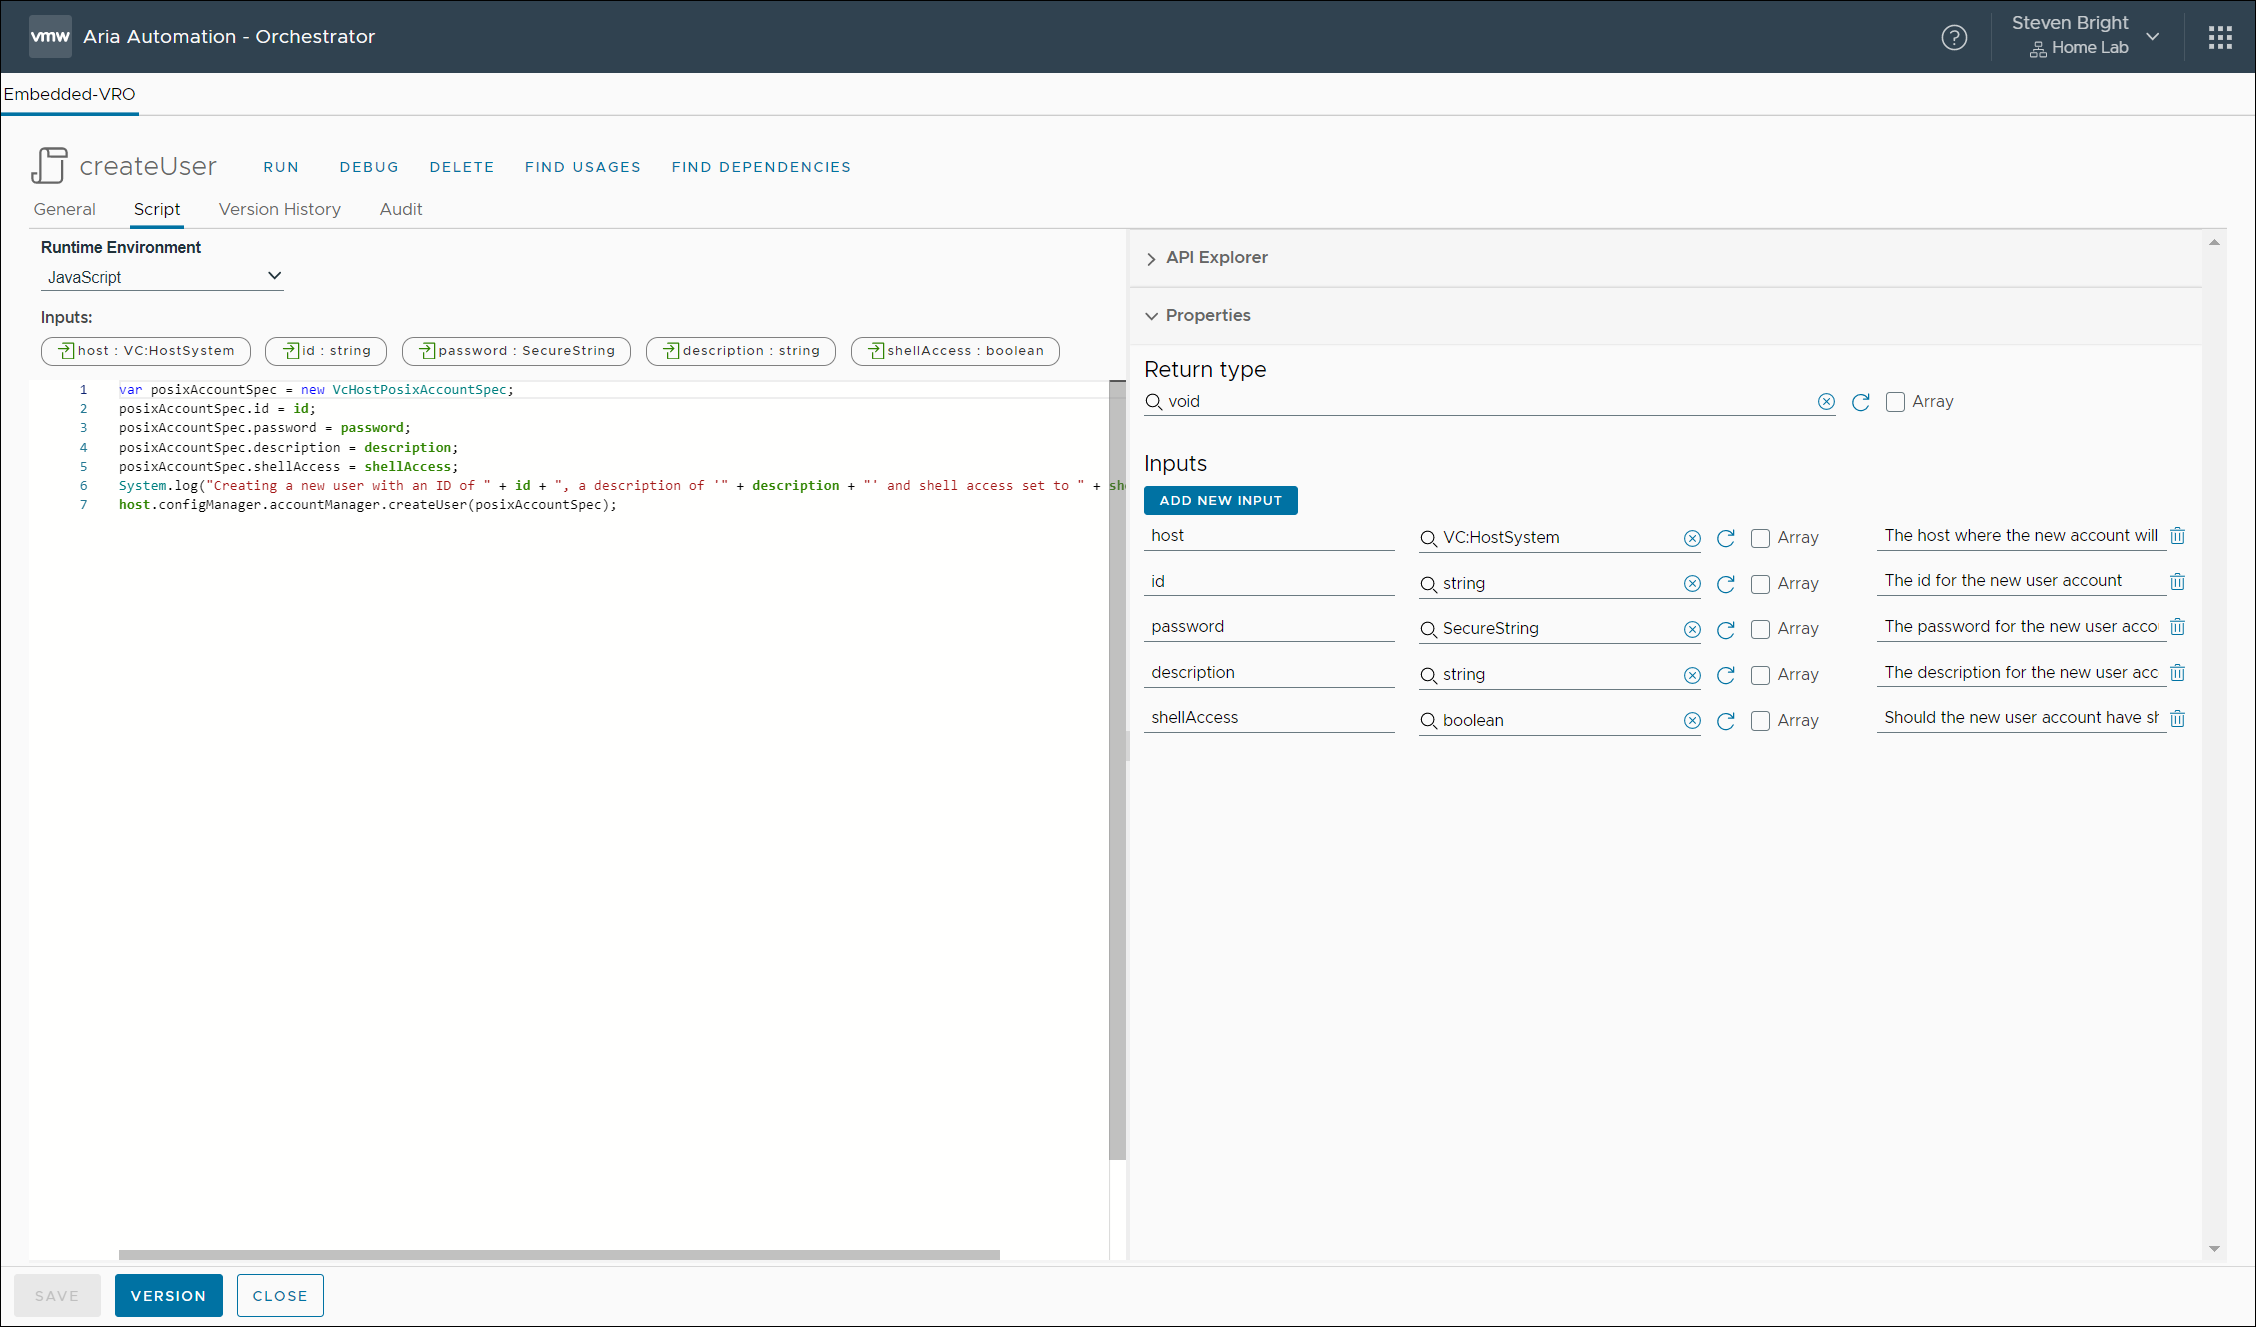 Screenshot of the createUser action in Aria Automation Orchestrator